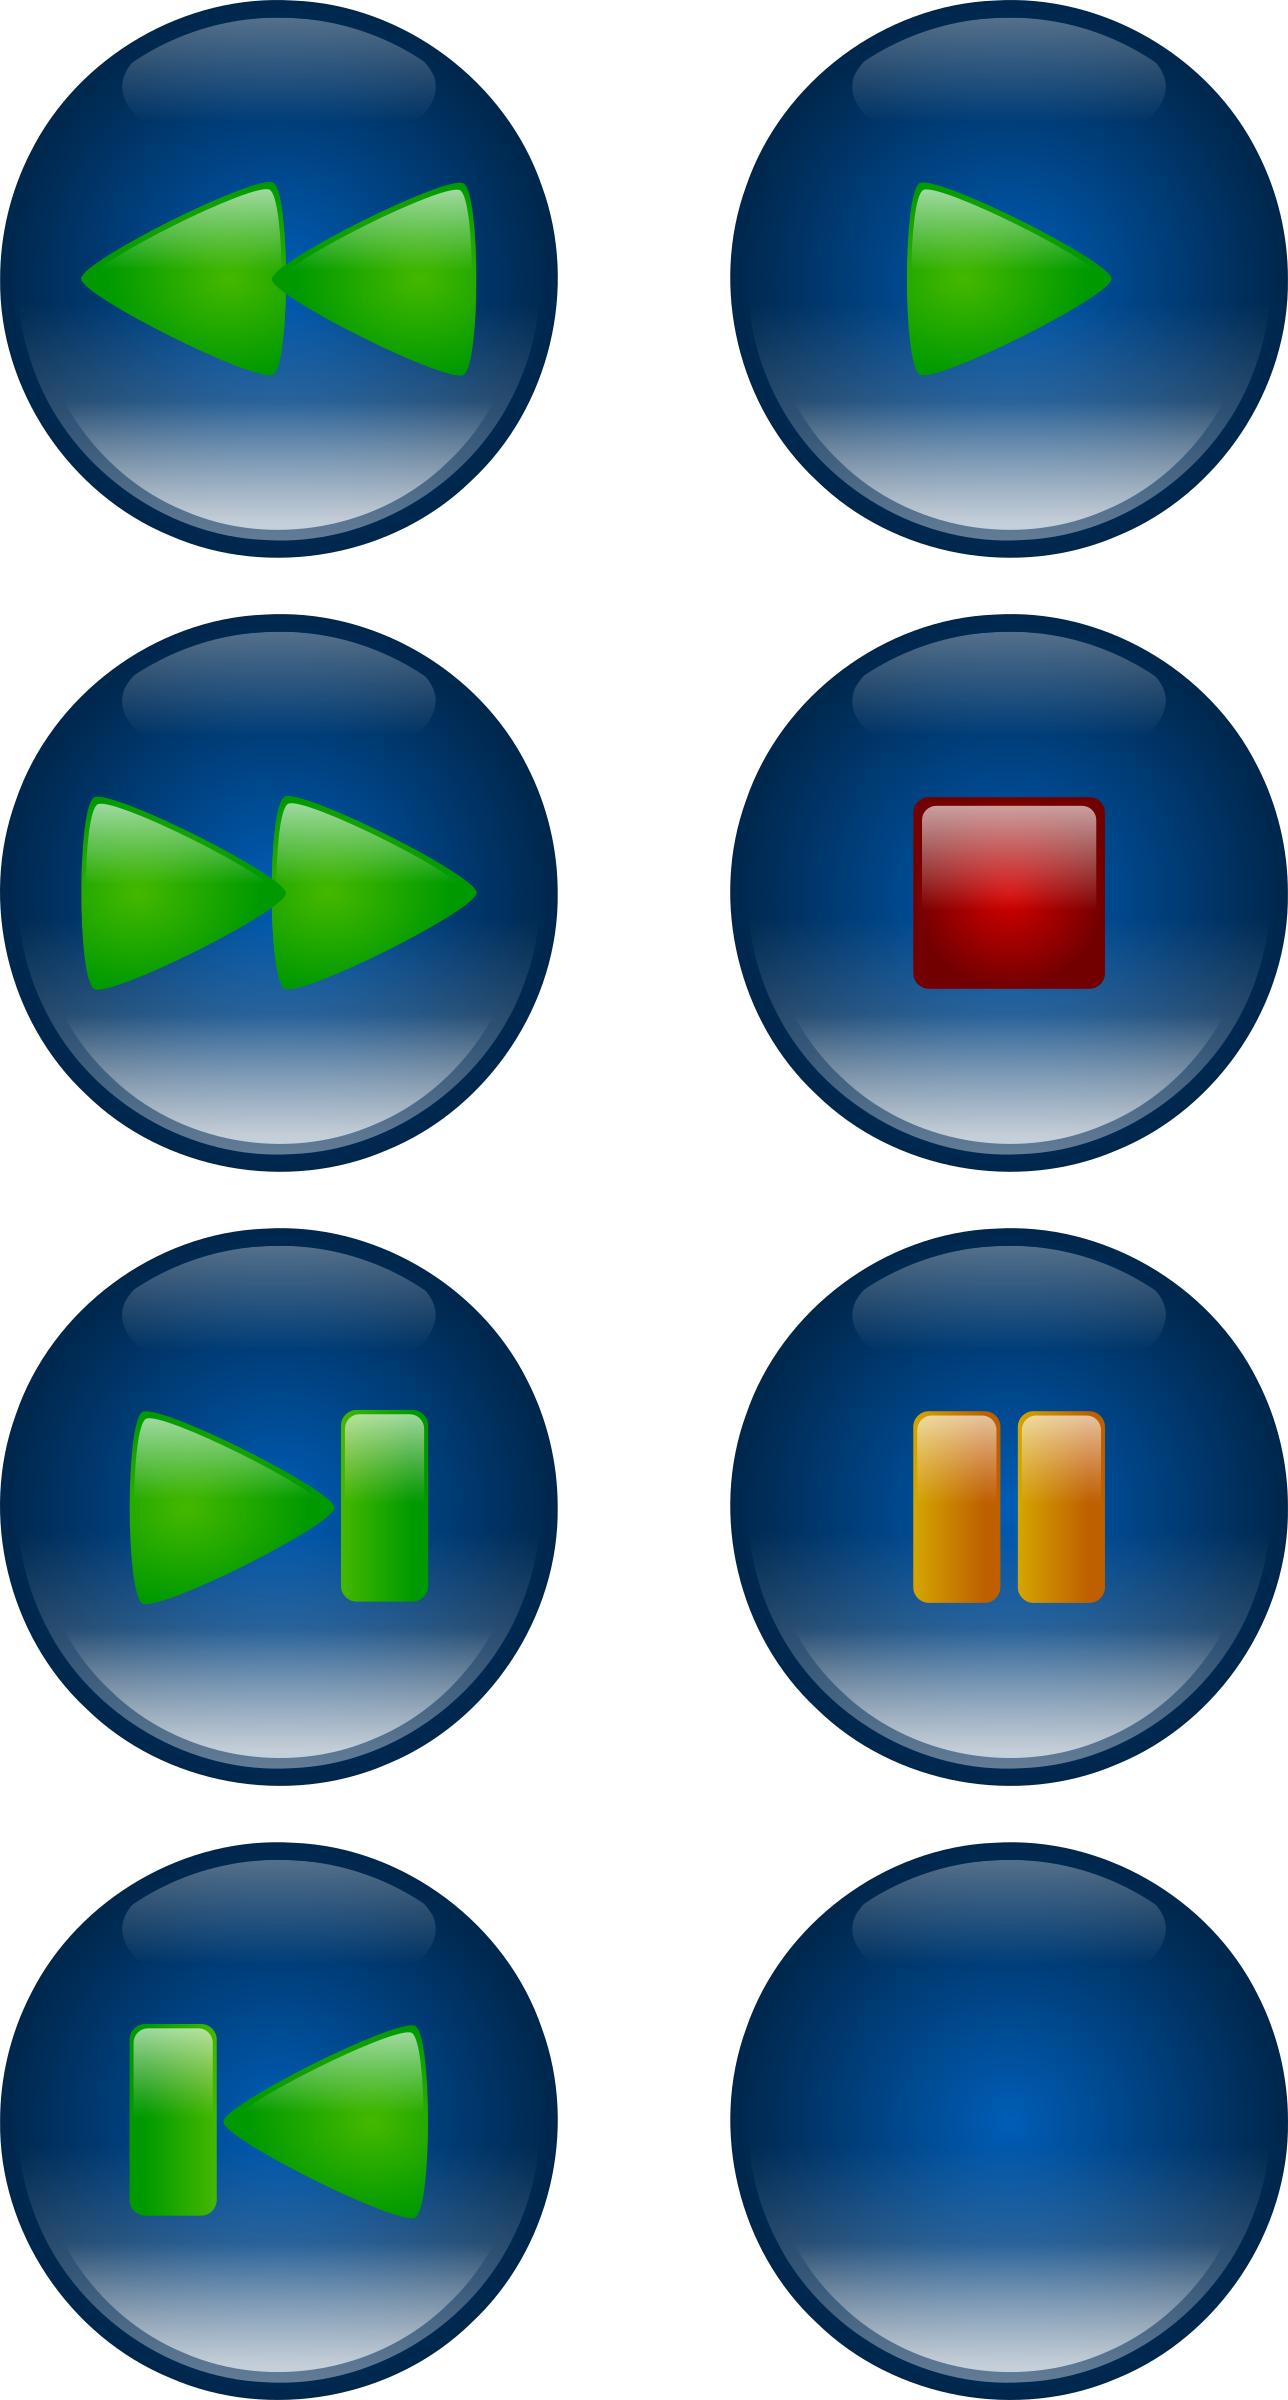 Media Buttons icons